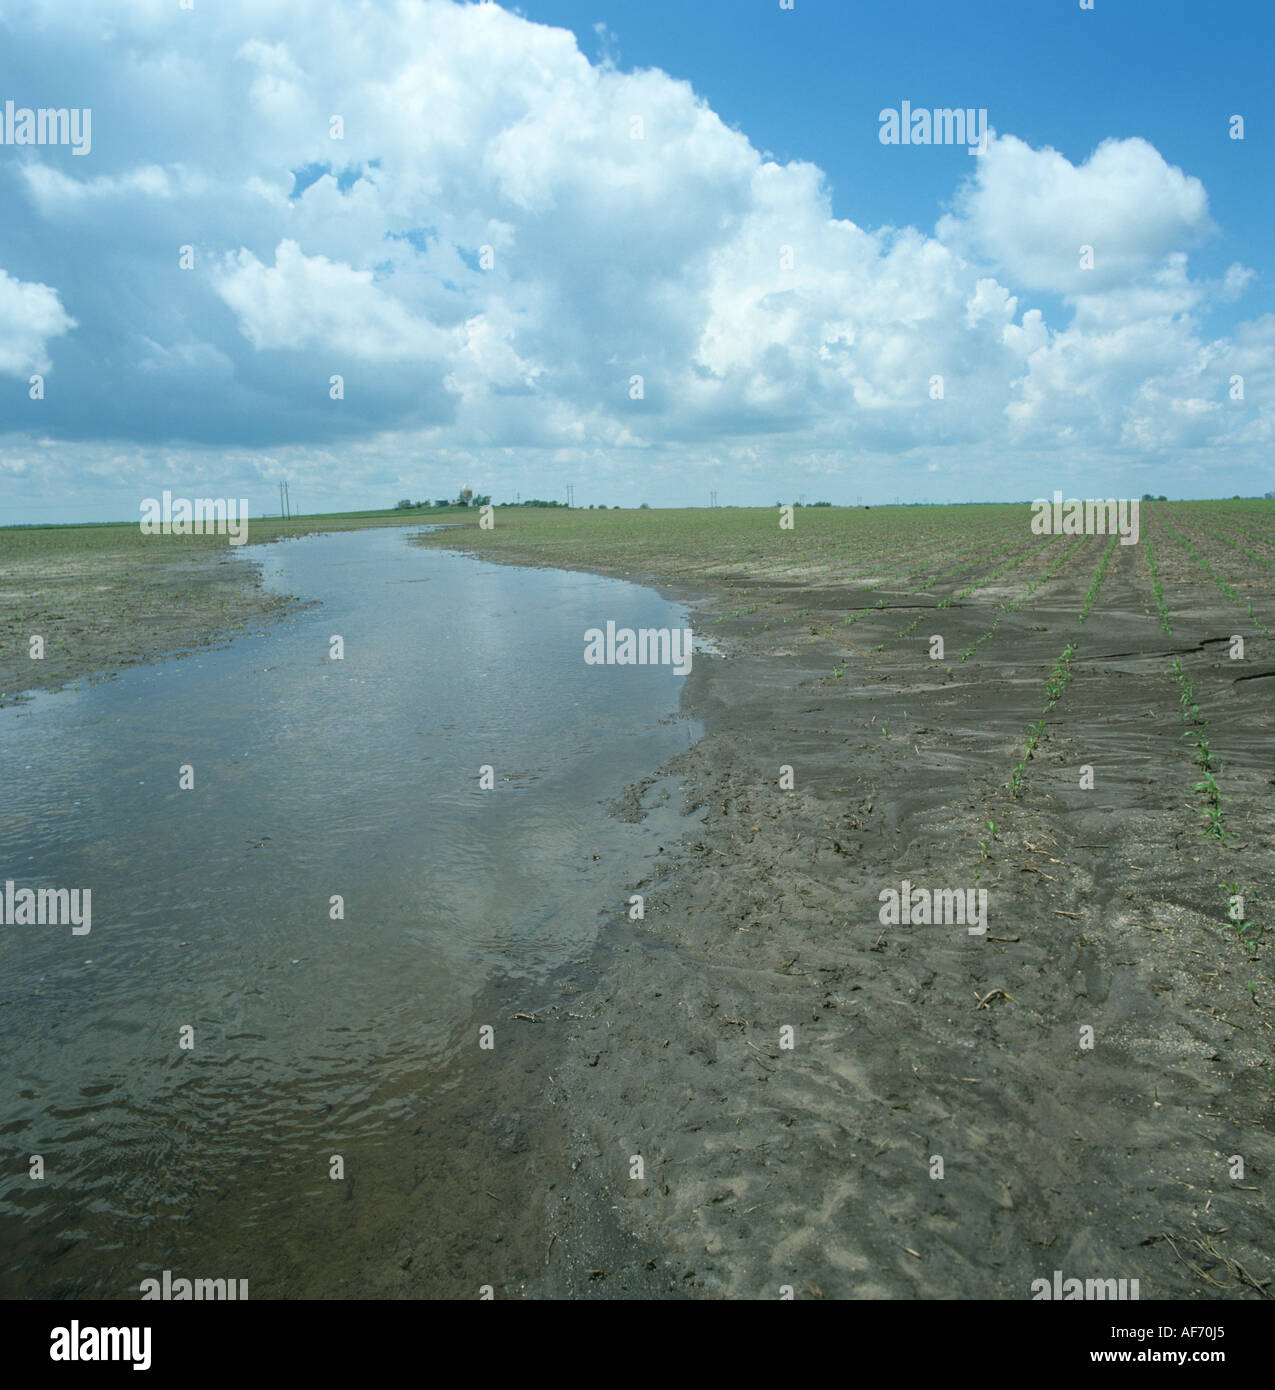 Swollen stream overflowing after flash flood and running through emerging maize or corn crop Stock Photo